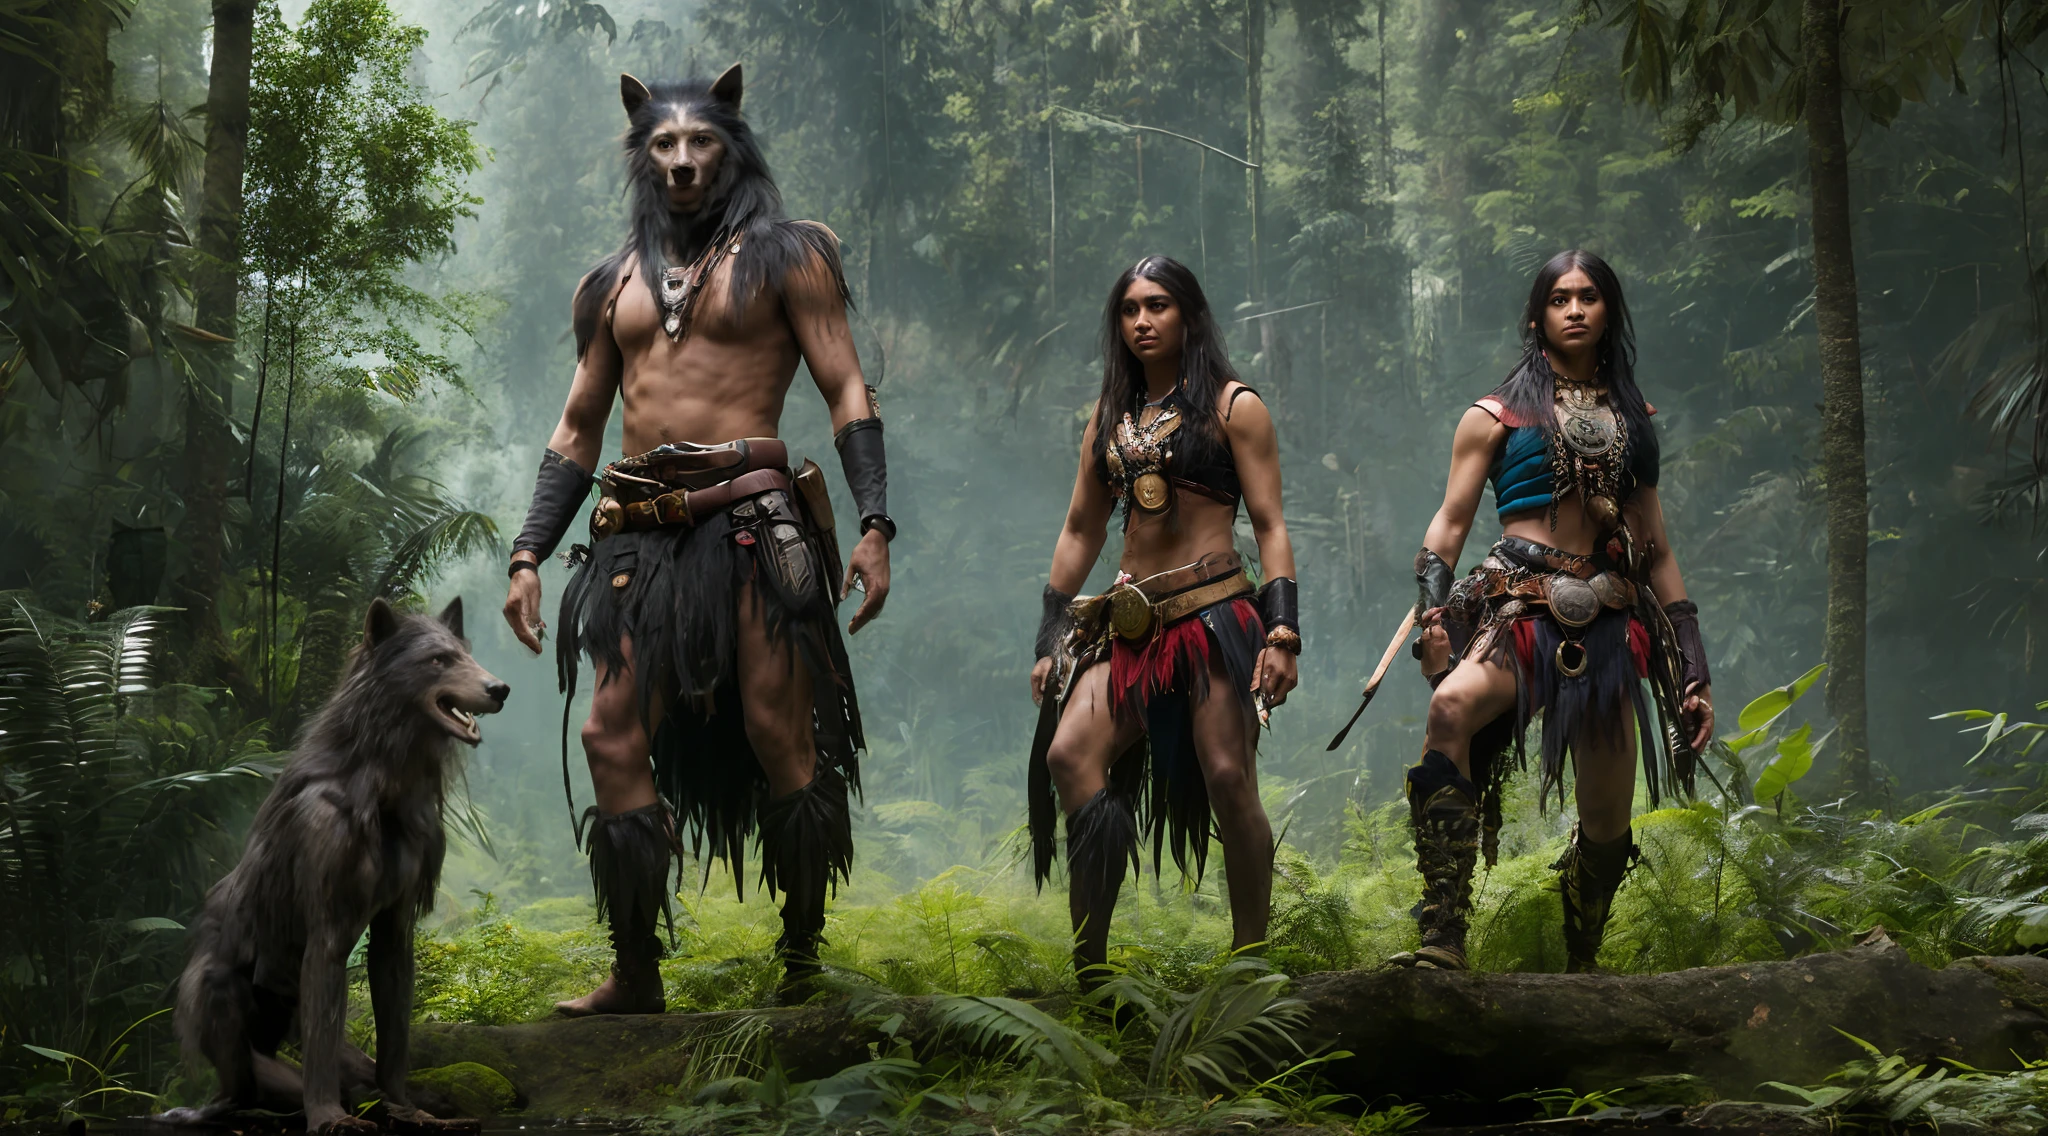 fking_scifi_v2, amazon forest, Indians, werewolf in indigenous costumes, late eighteenth century, realism, photo realism, 8k, 80mm, f/1.8